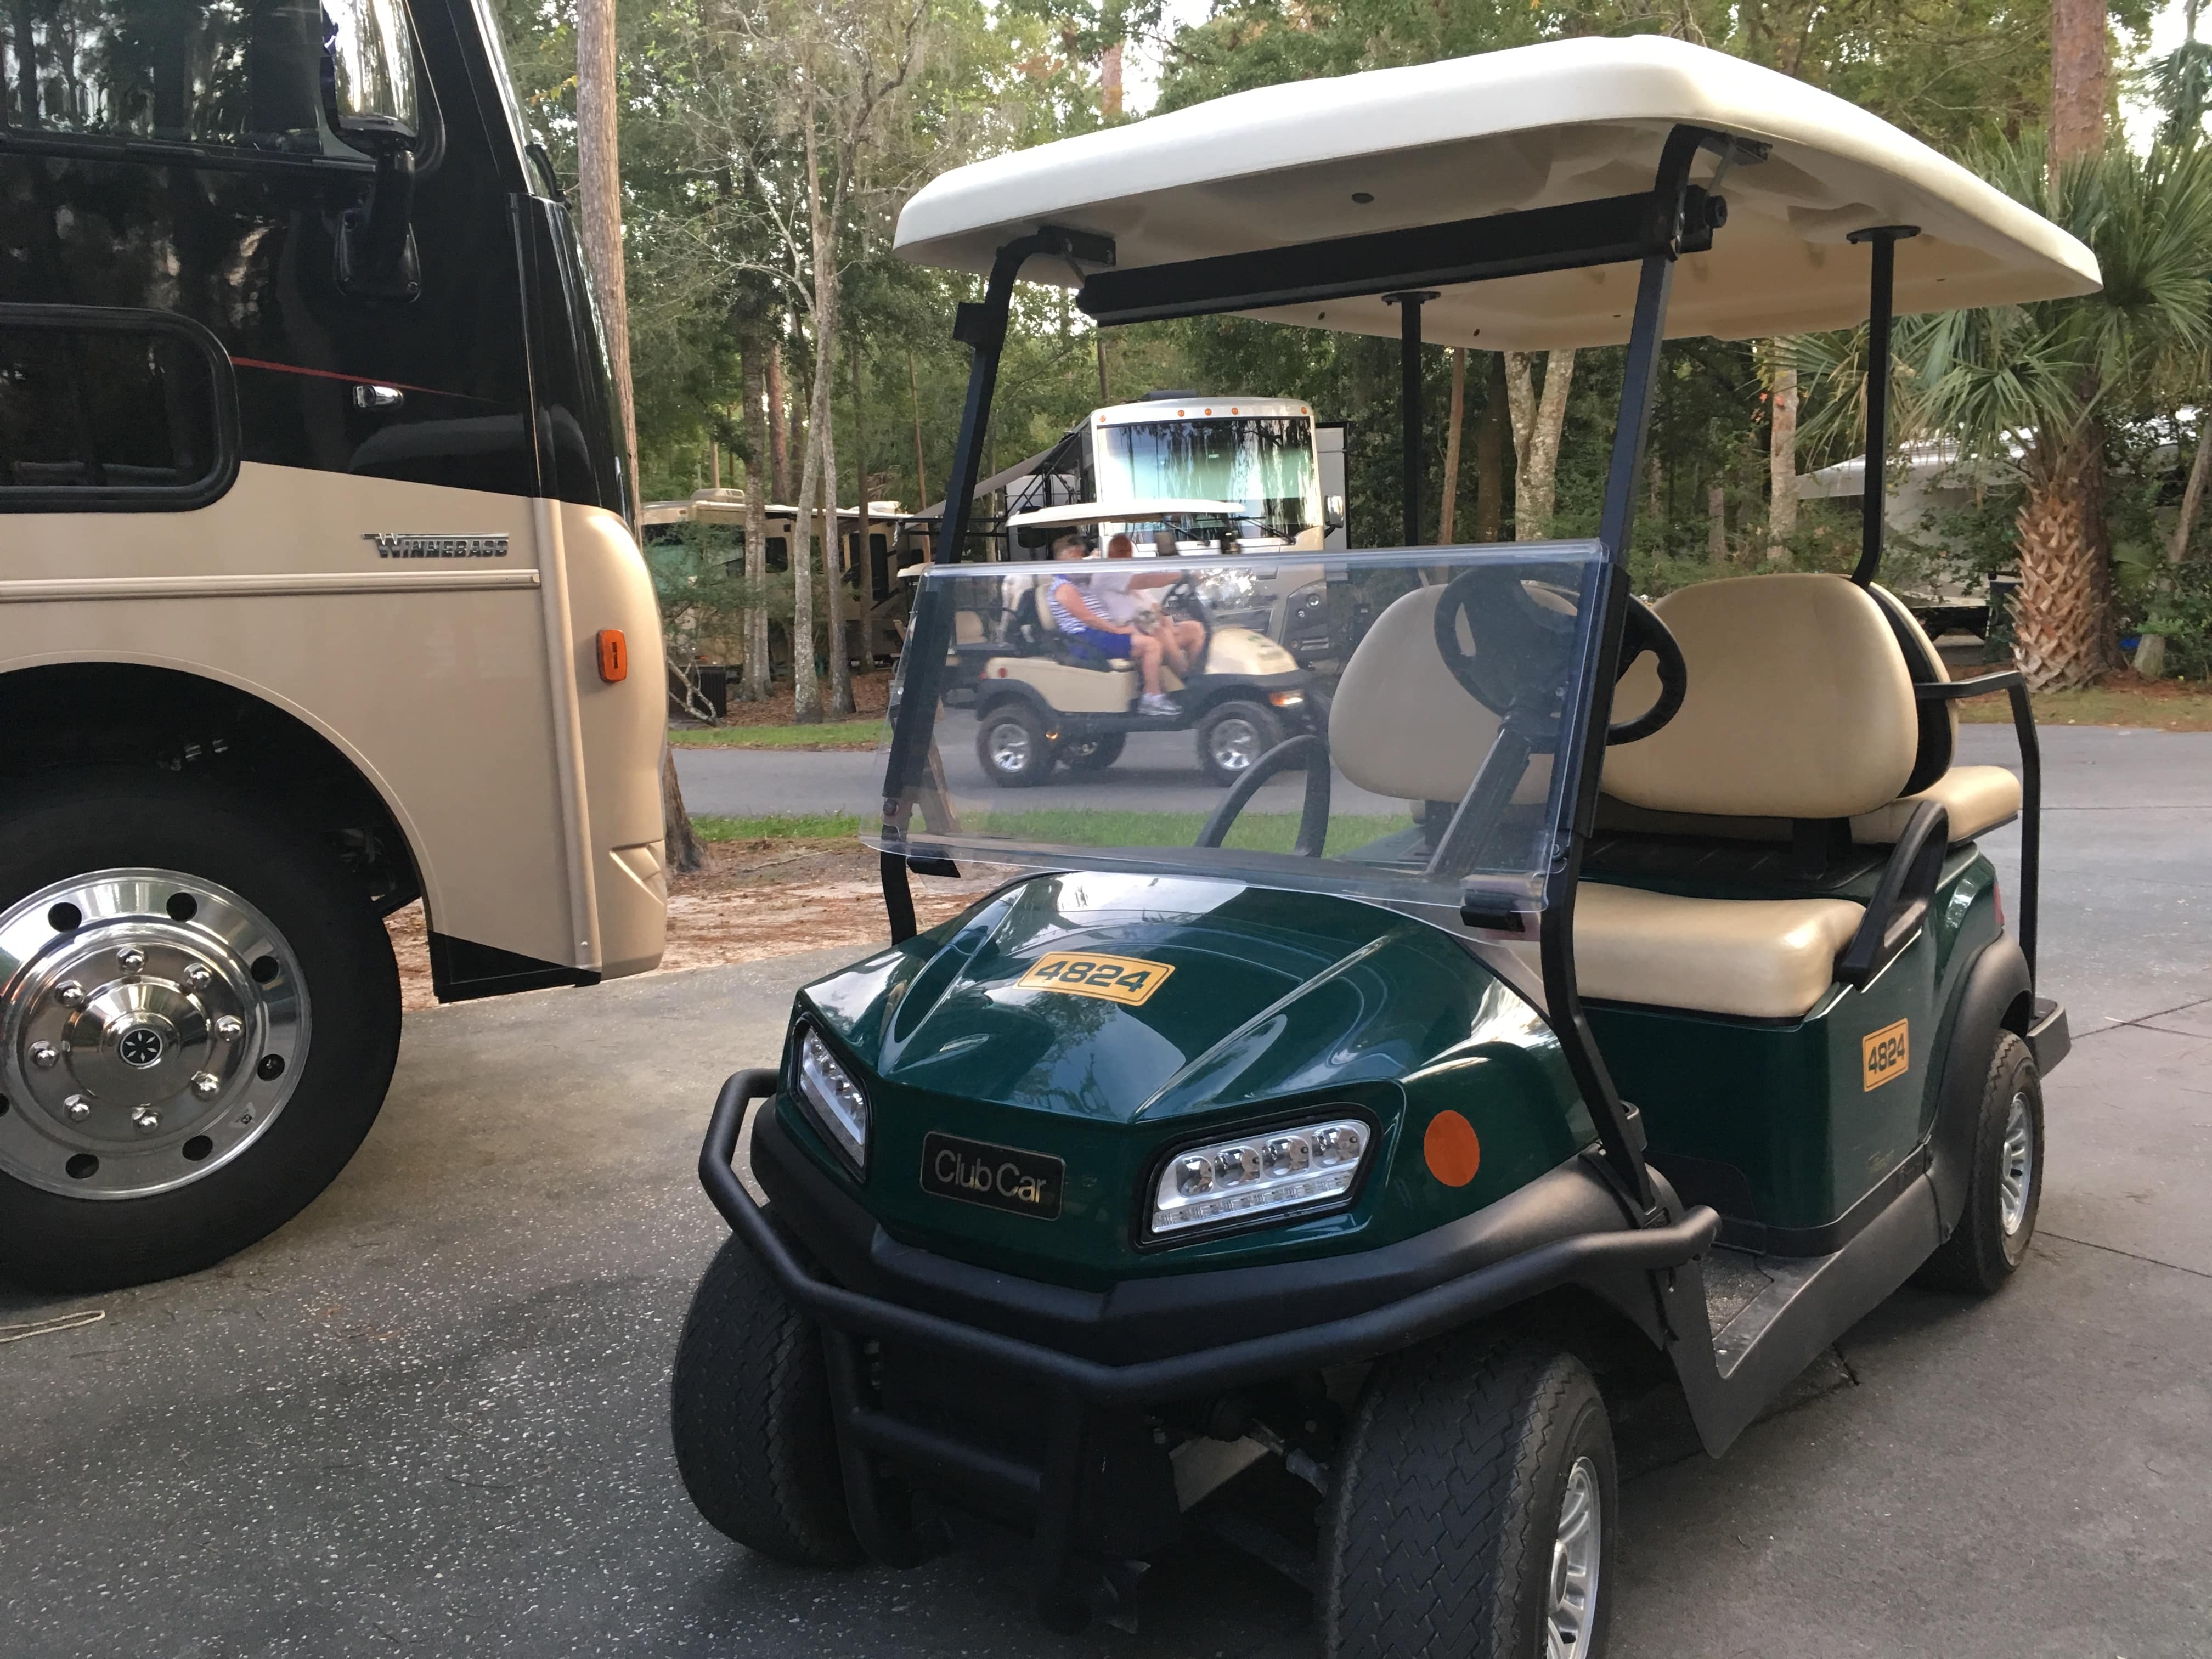 Don't forget to reserve your golf cart rental when booking your Fort Wilderness reservations.